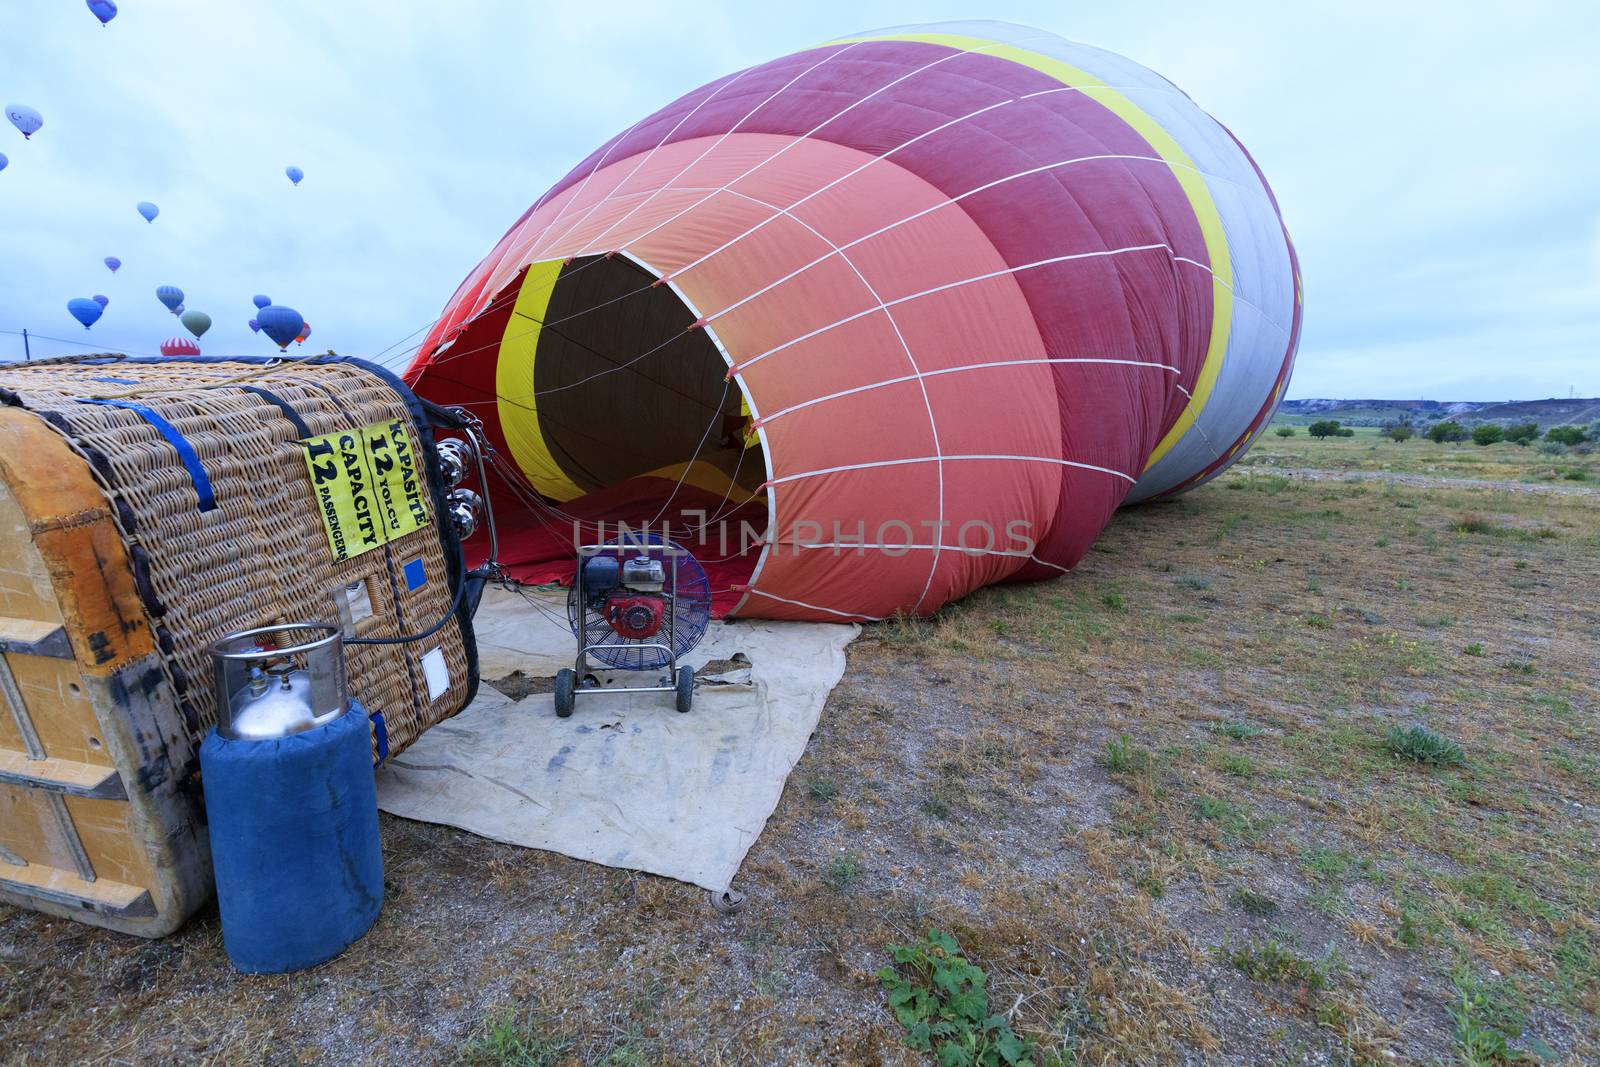 The process of inflating balloons with a gasoline fan and a gas burner. by Sergii